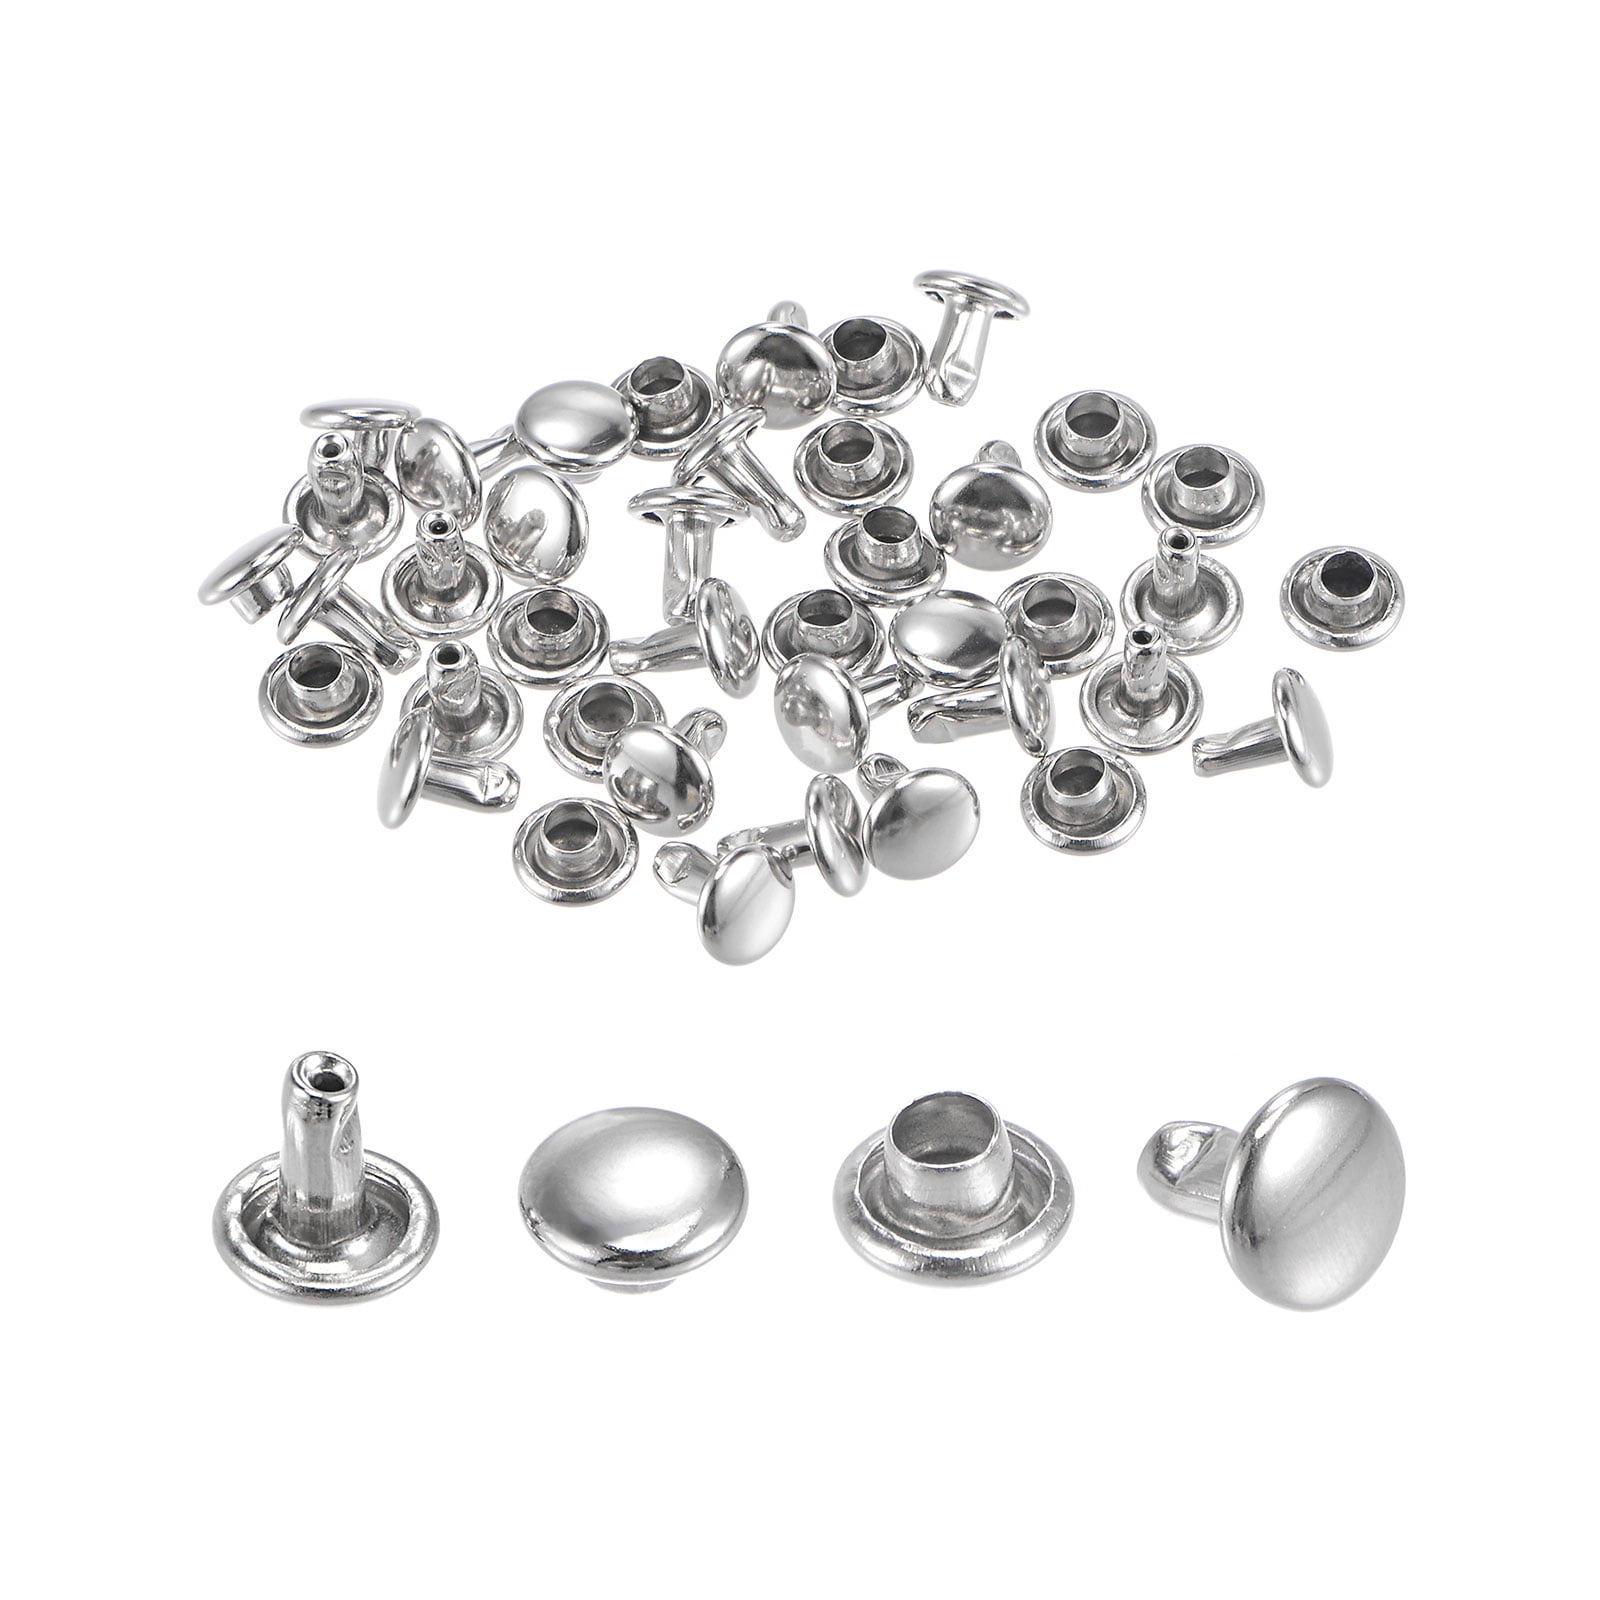 Silver Rivets for Leather - 50ct 6mm Silver Cap Rivet Studs - Fast Shi –  usawholesalesupplycc